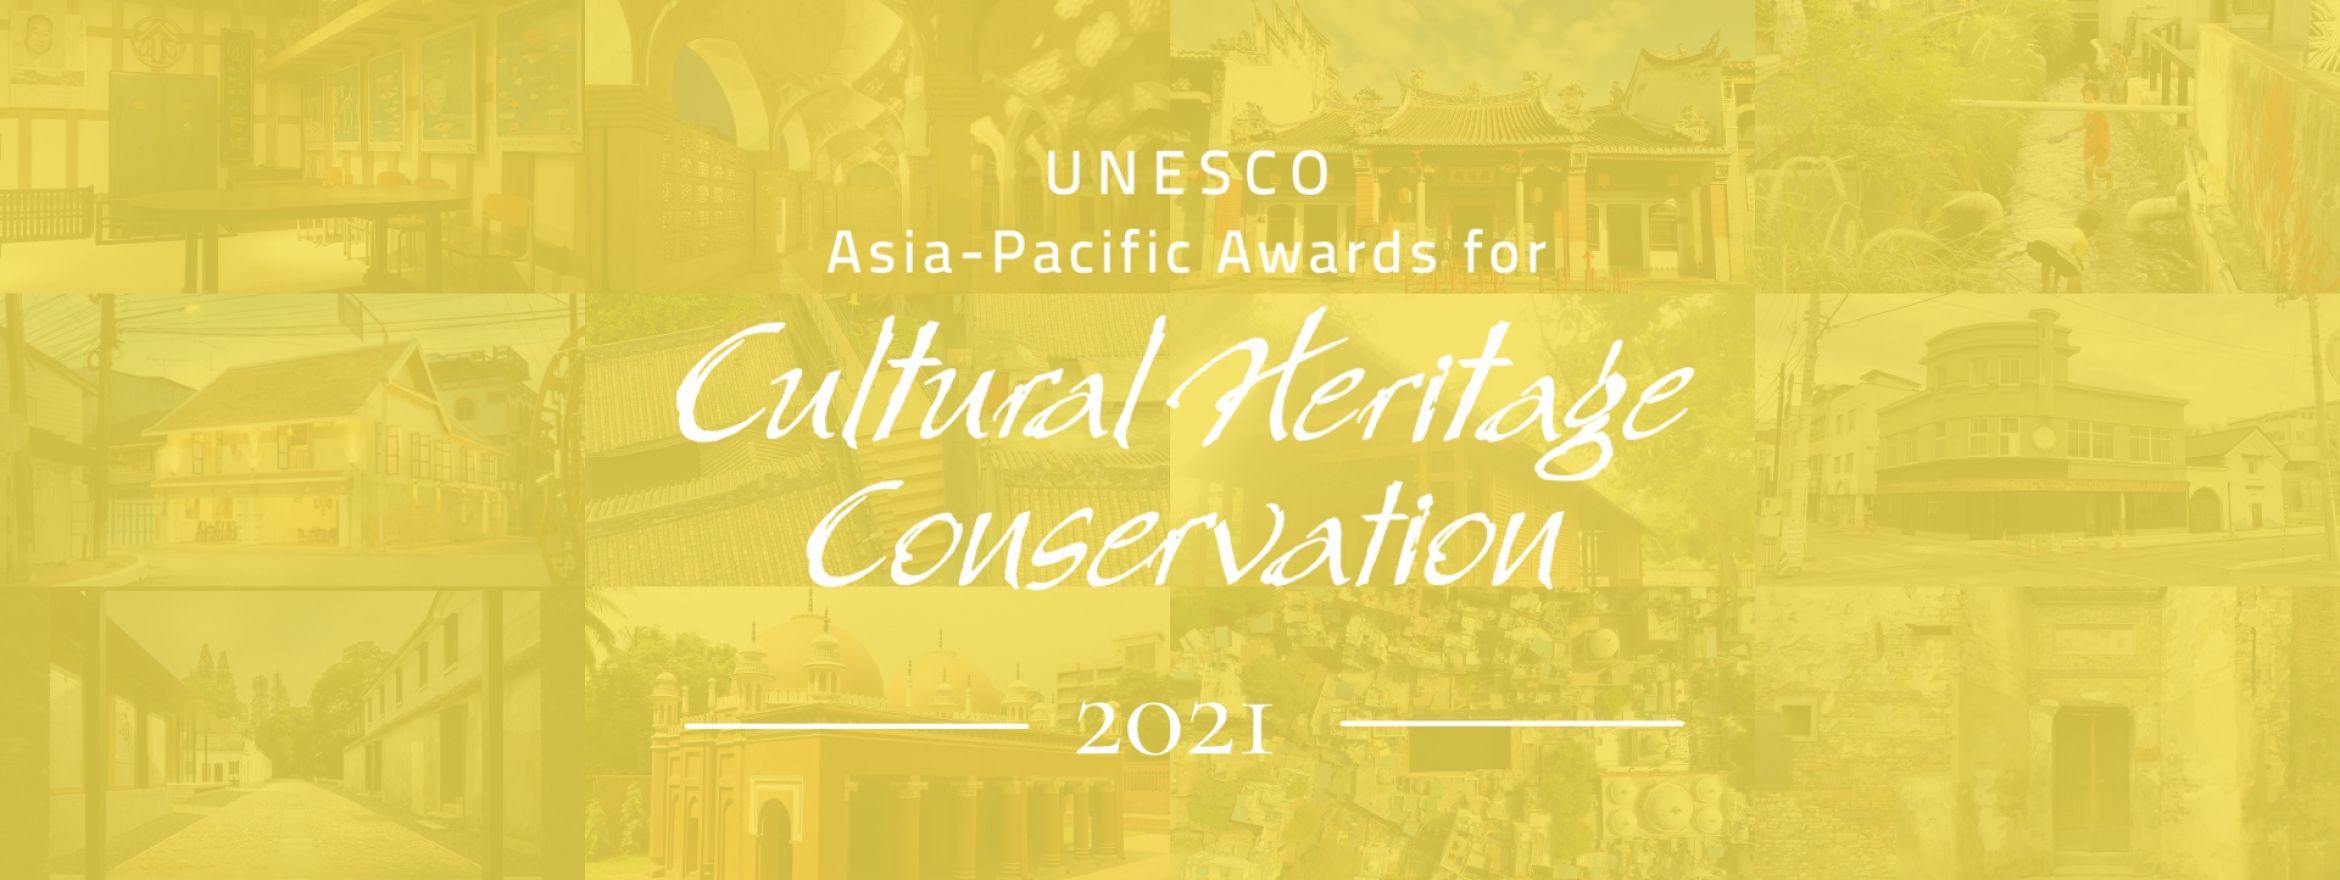 2021 UNESCO Asia-Pacific Awards for Cultural Heritage Conservation: Announcement of Winners